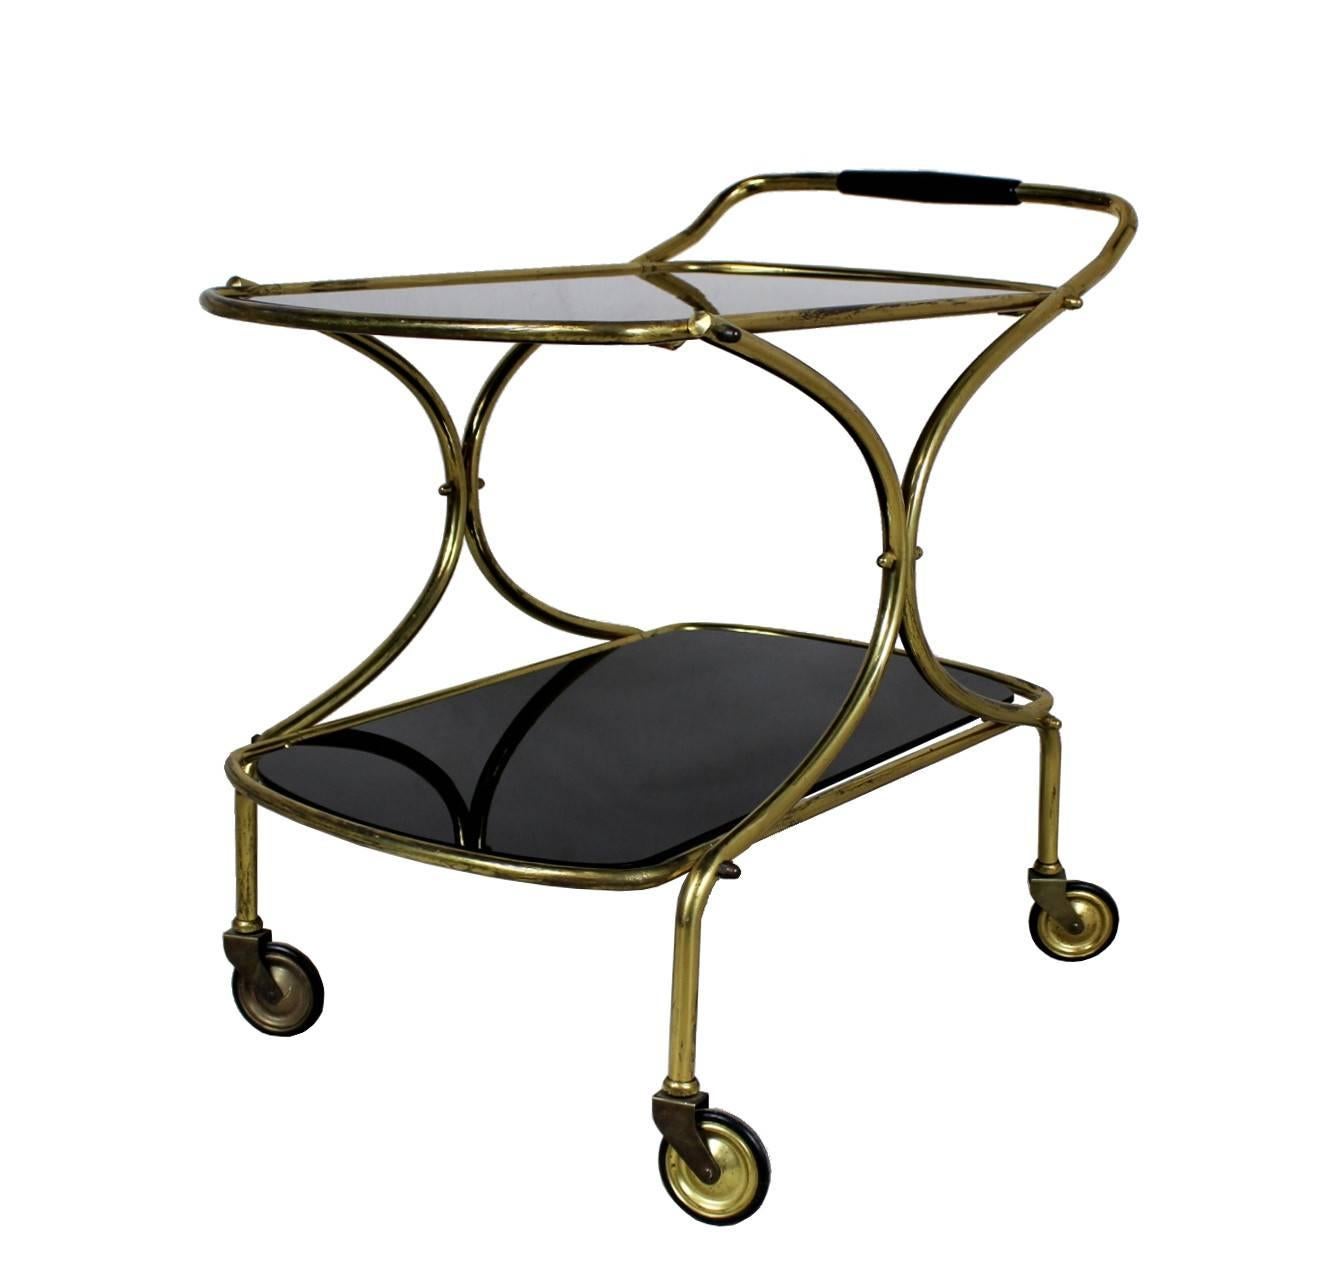 Trolley made in the 1960s in Italy. Material is brass with metallurgical glass.